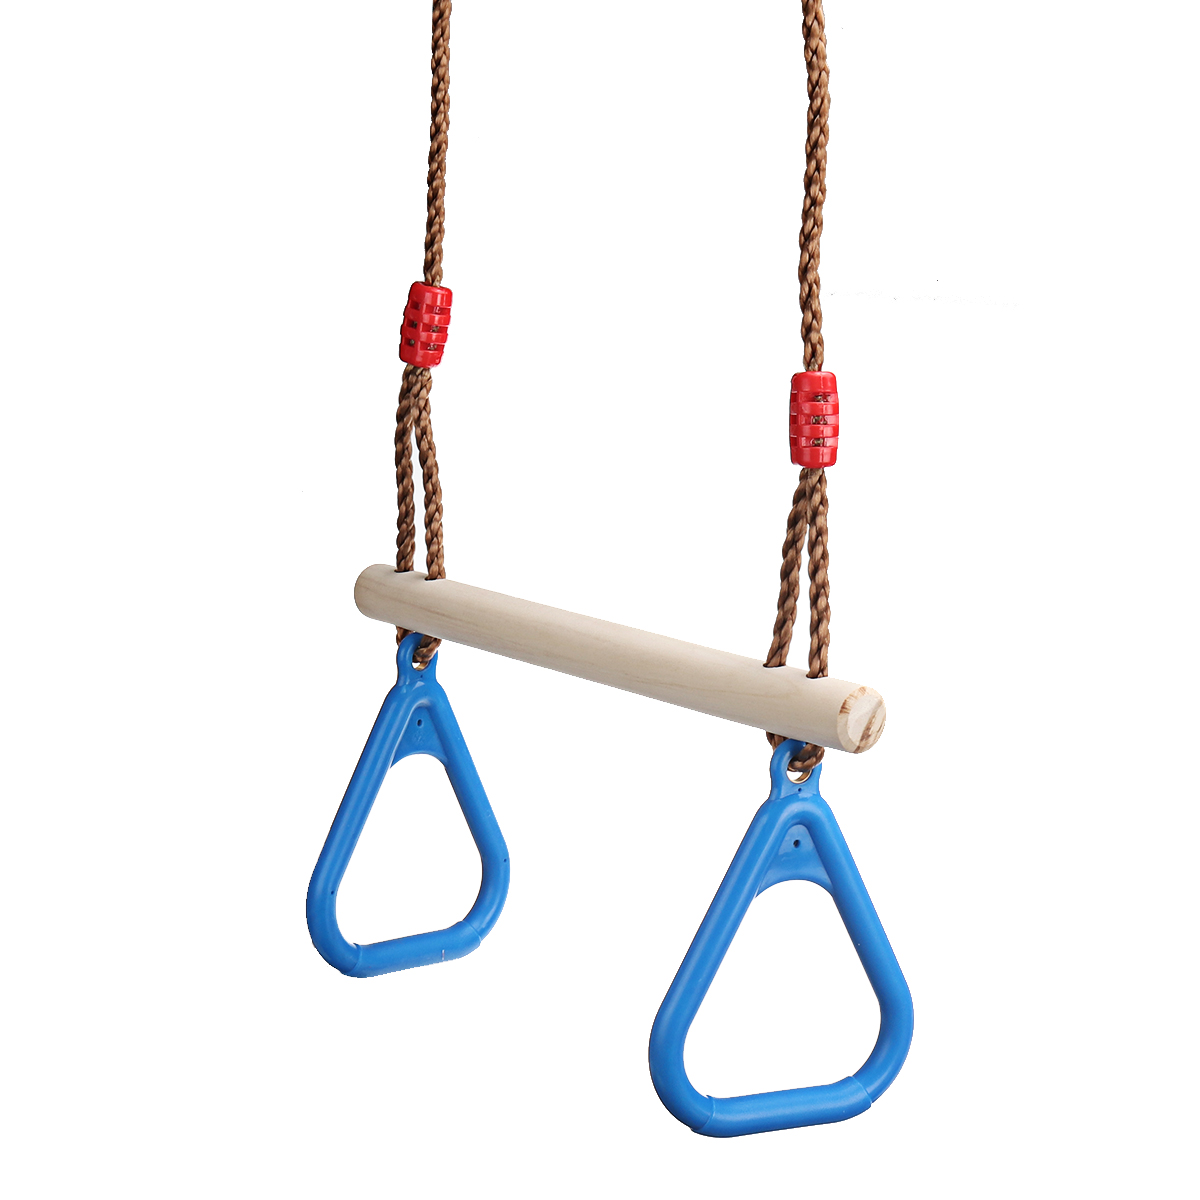 Wooden-Hand-Rings-Climbing-Swing-Seat-Toy-Outdoor-Sports-Fitness-Children-Supplies-Disc-Monkey-Kids--1795979-5